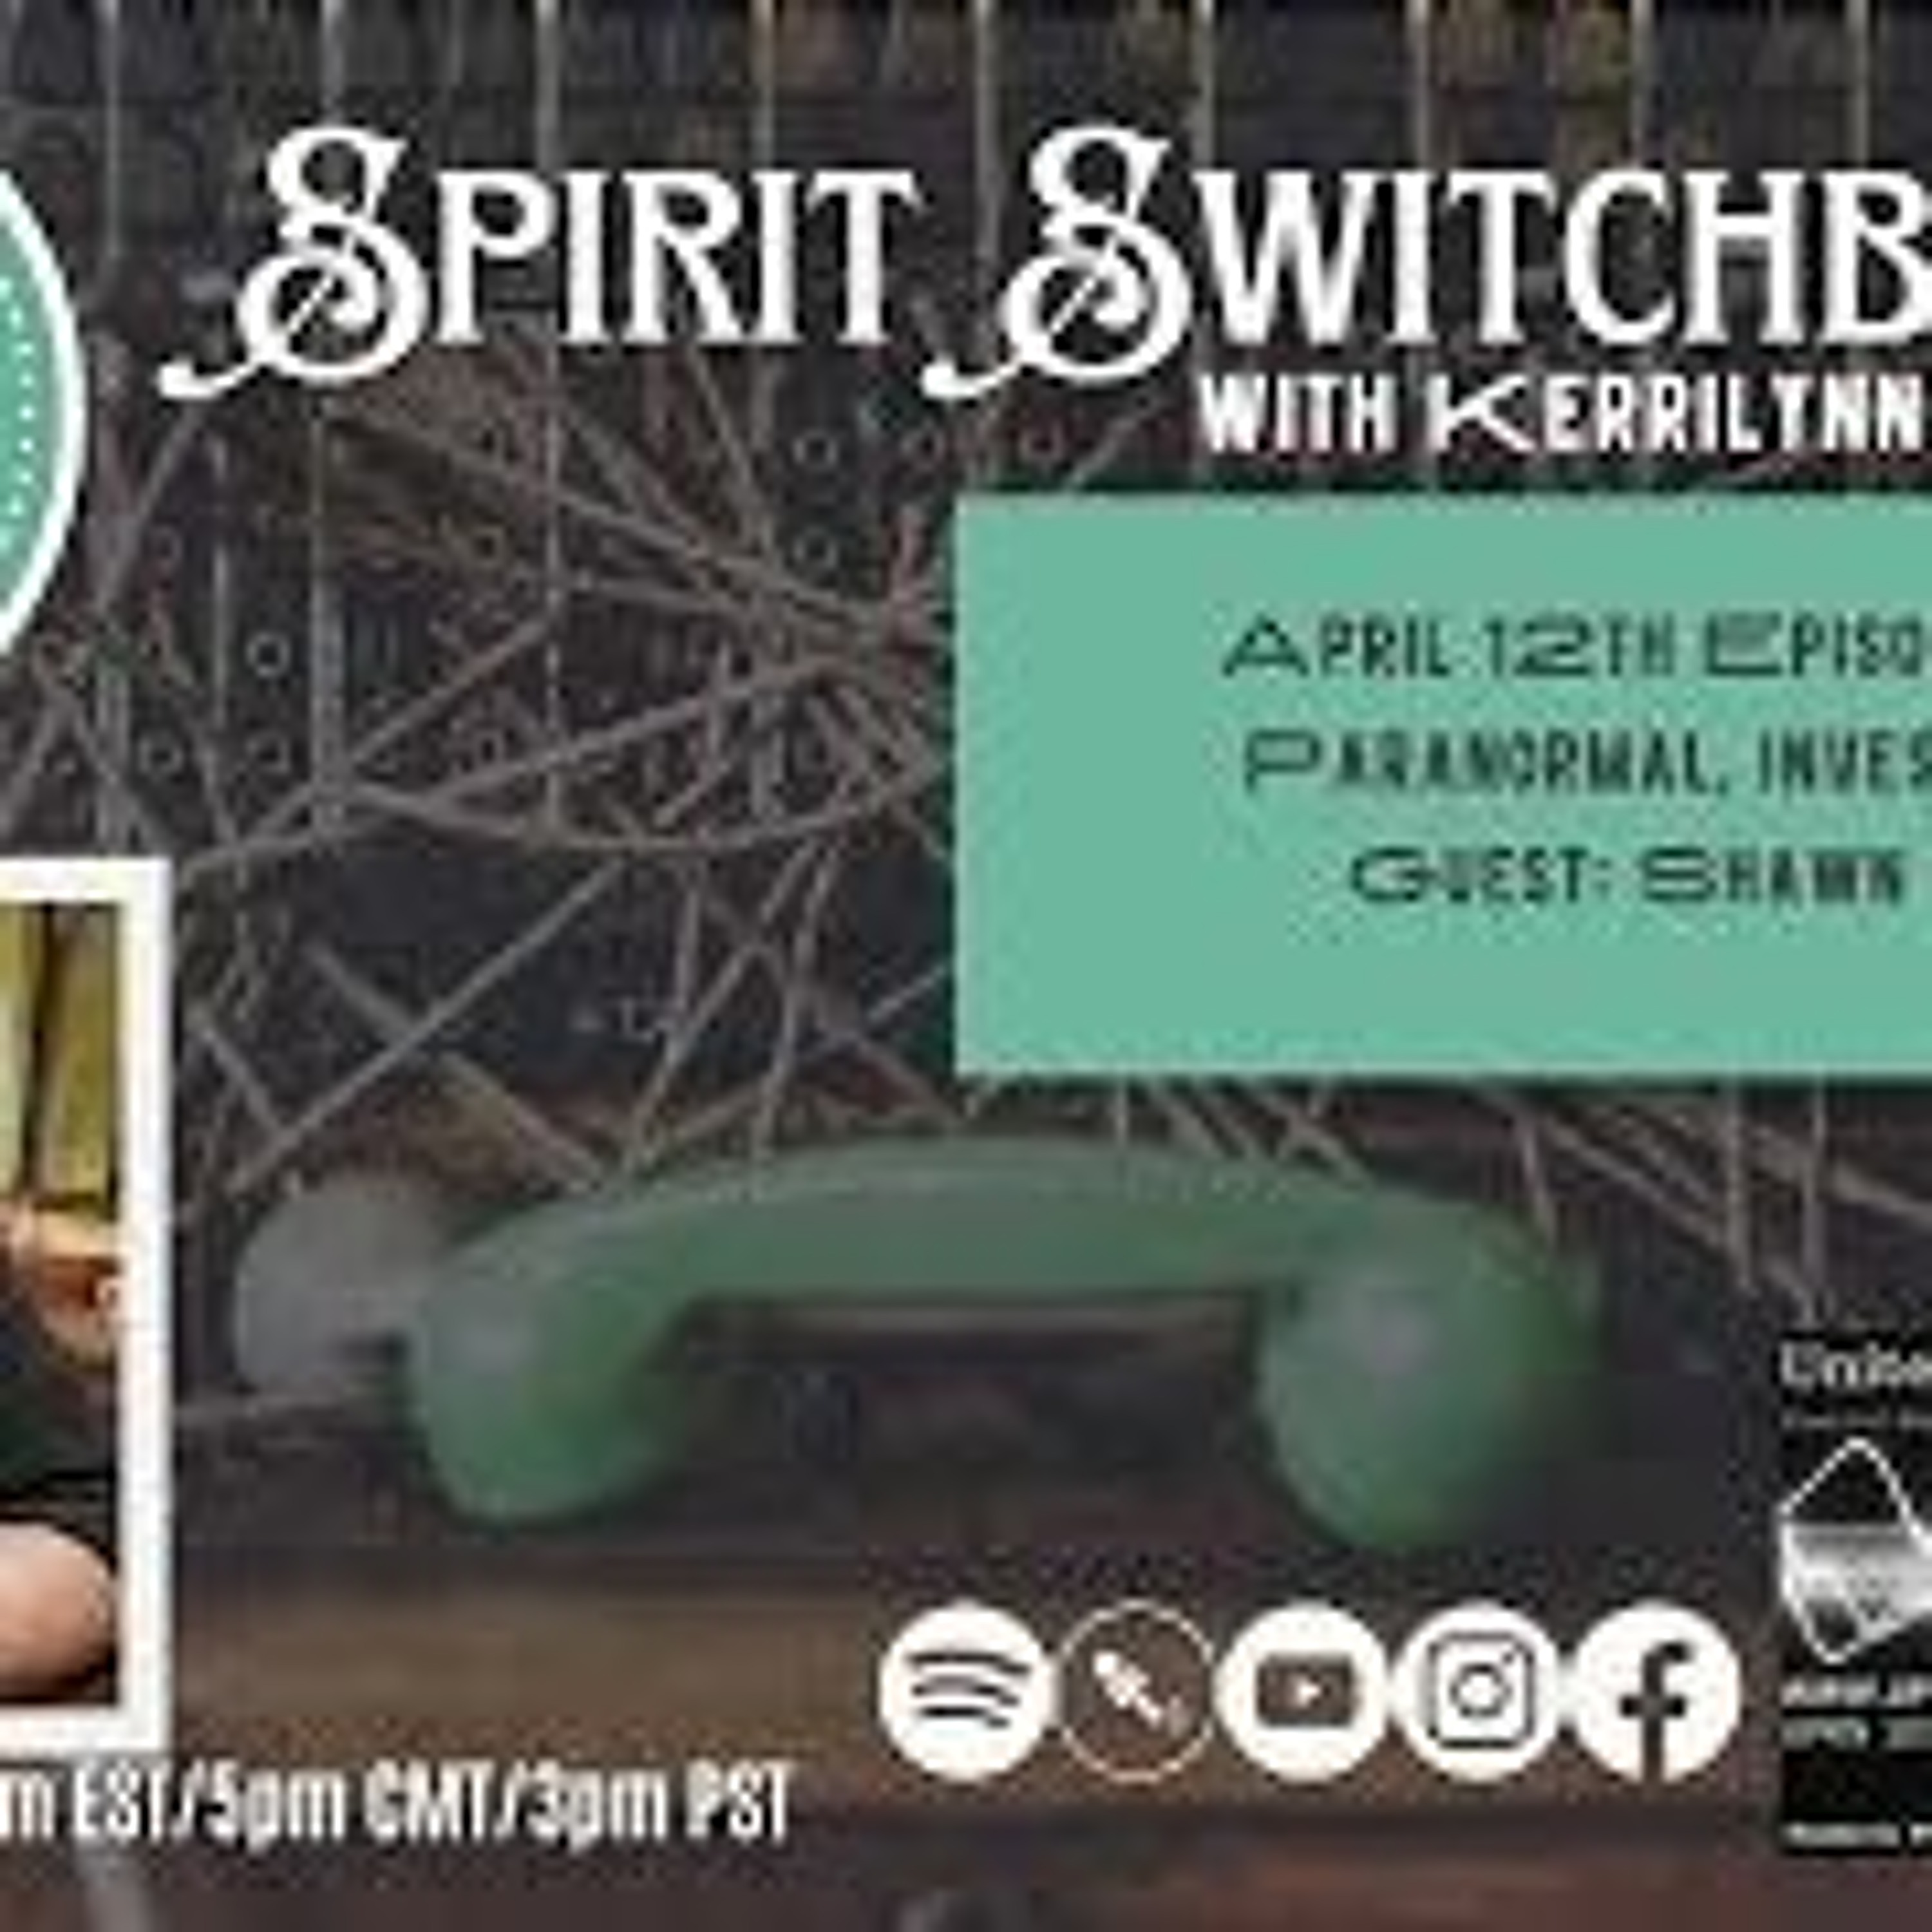 Spirit Switchboard -Shawn Kelly - Paranormal Investigations